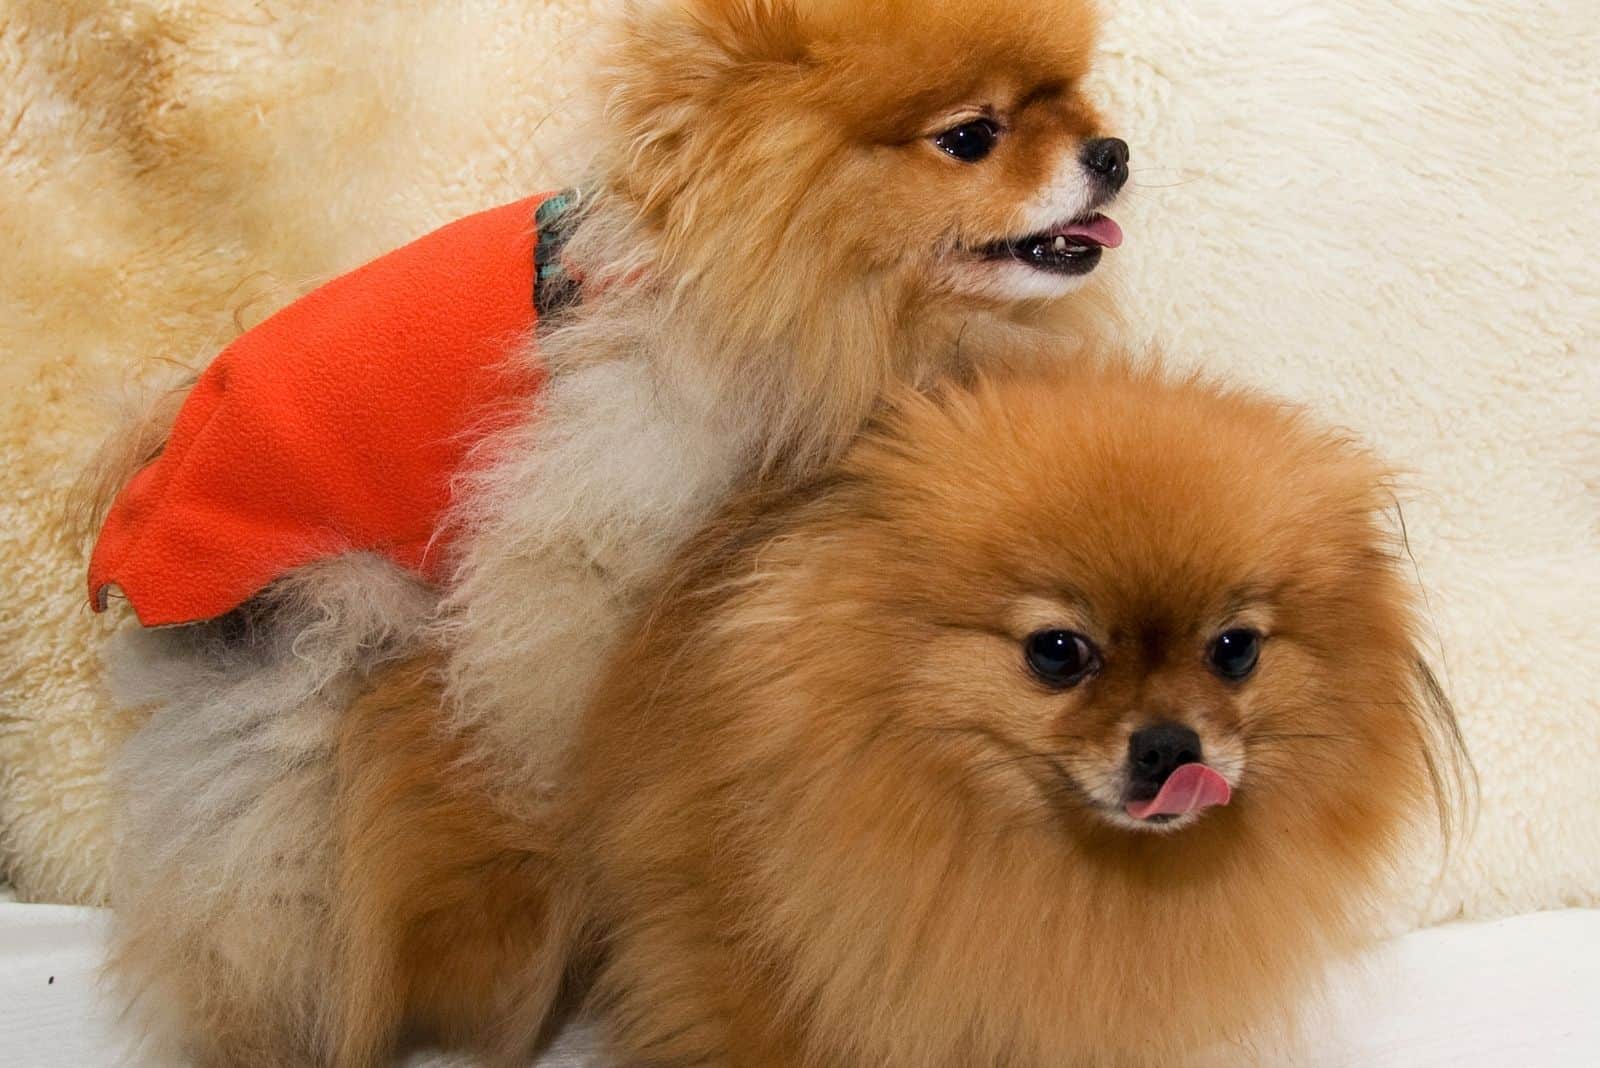 pomeranian dogs mating indoors in close-up photography